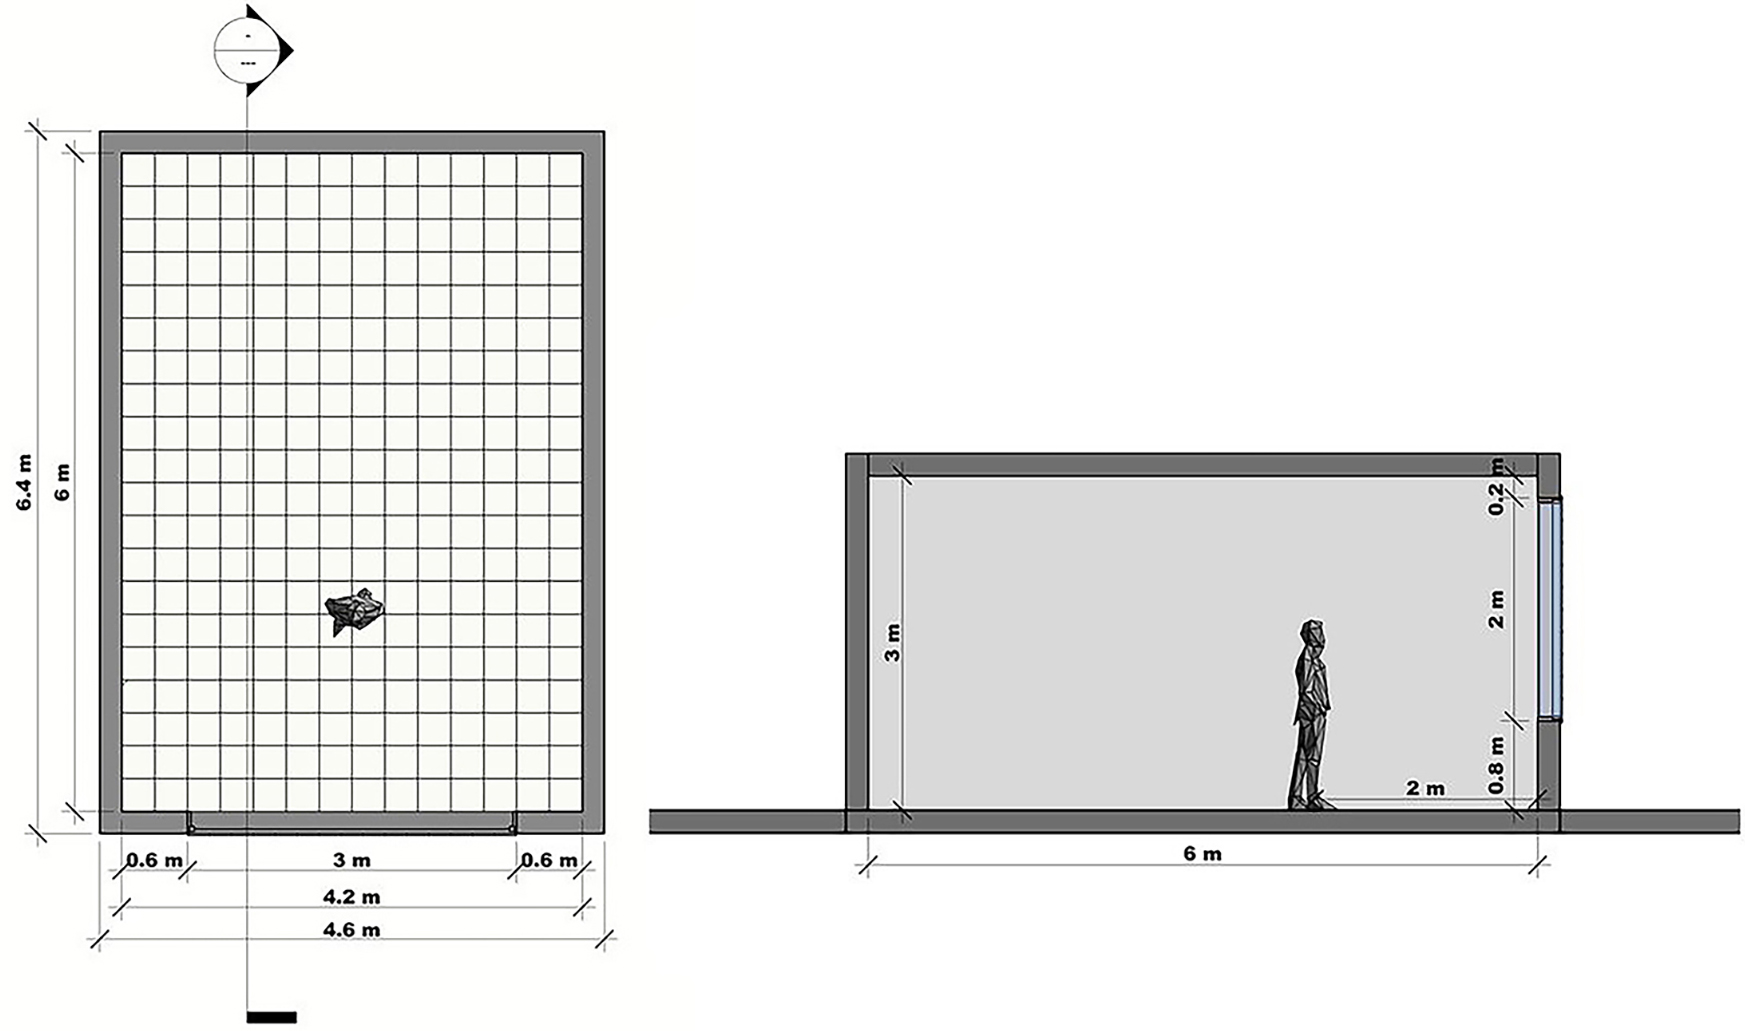 The dimensions of the room and Moshabak used for the study.